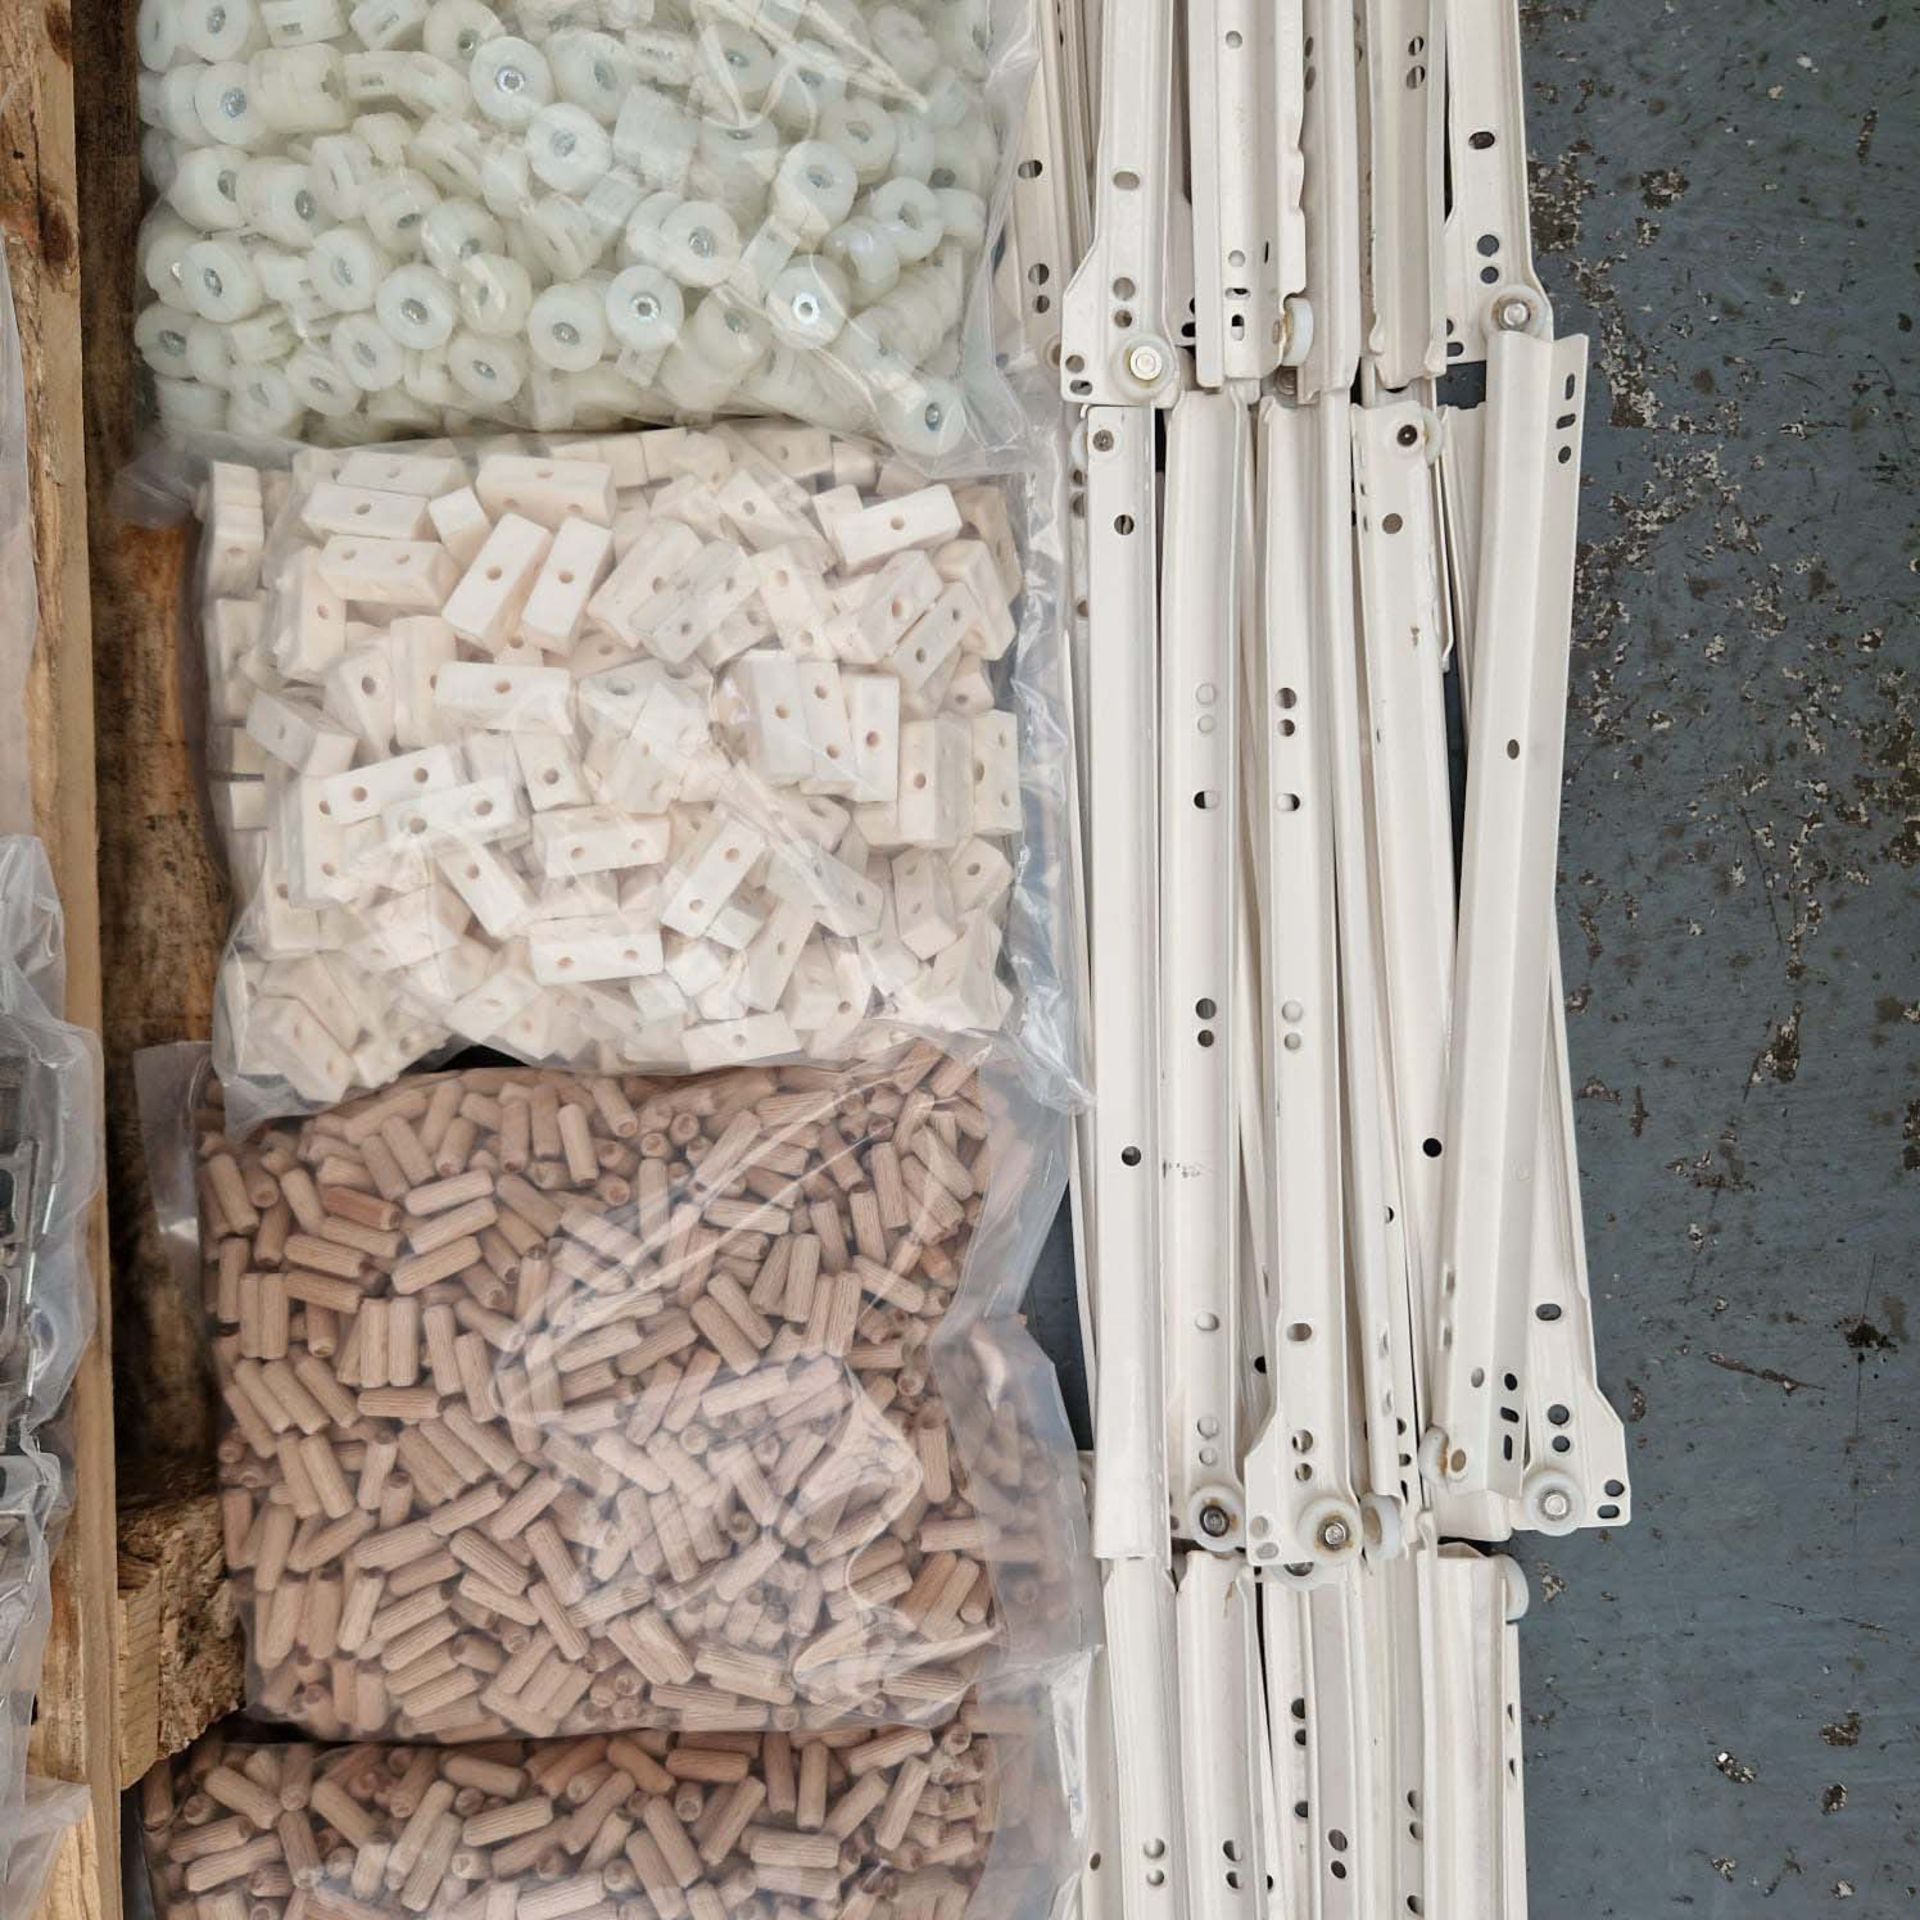 Quantity of Various Screws, Dowels & Hinges Etc. For Woodworking. - Image 4 of 24